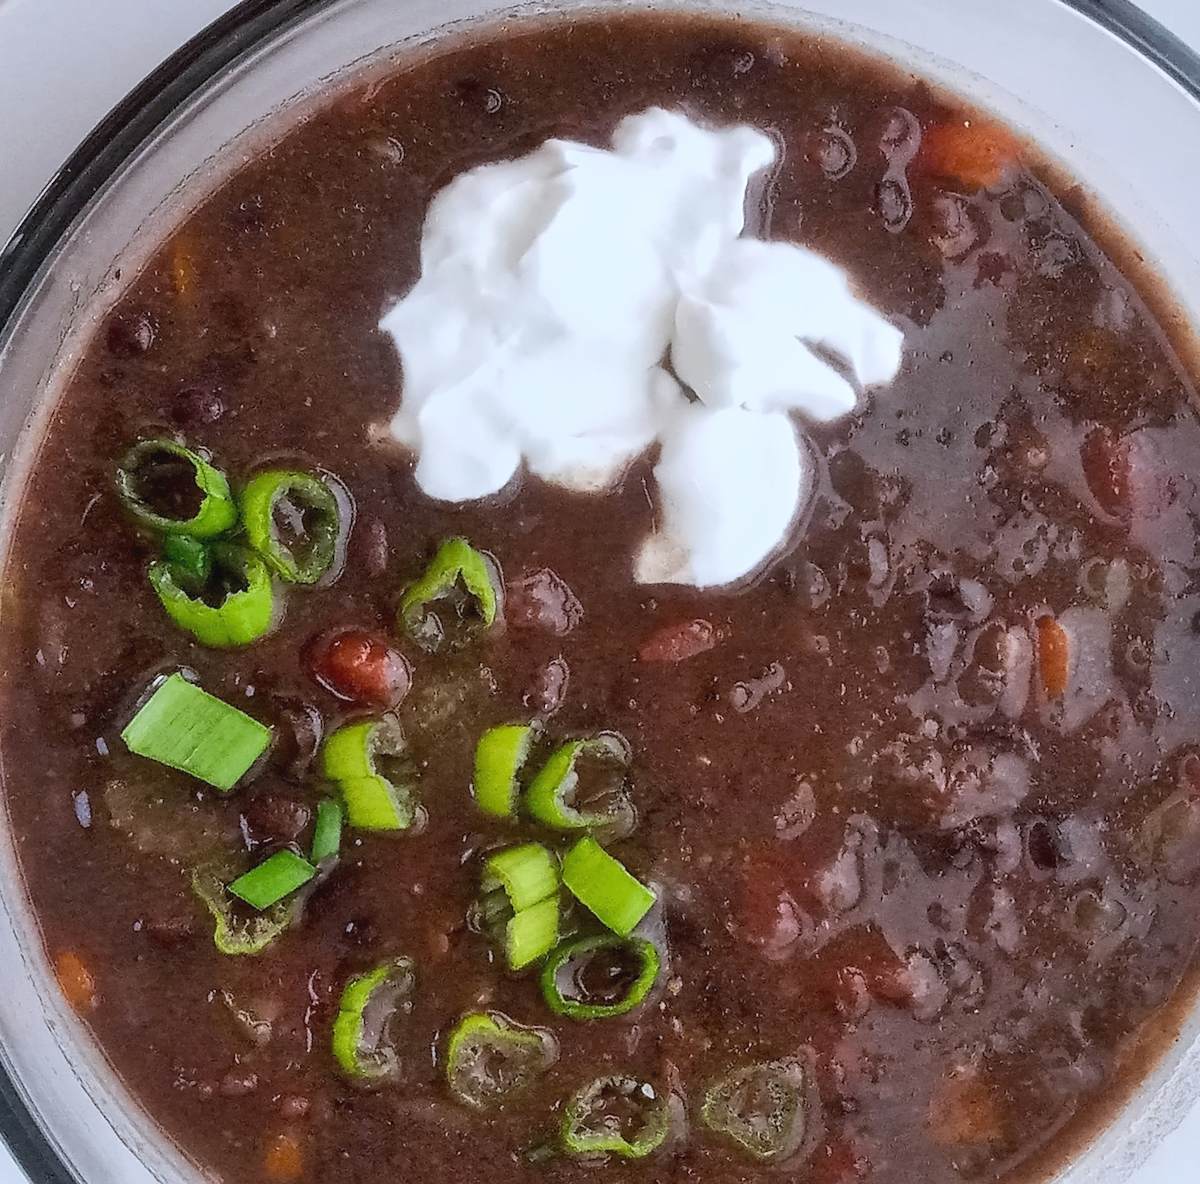 Warm bowl of low sodium black bean soup with chives and sour cream